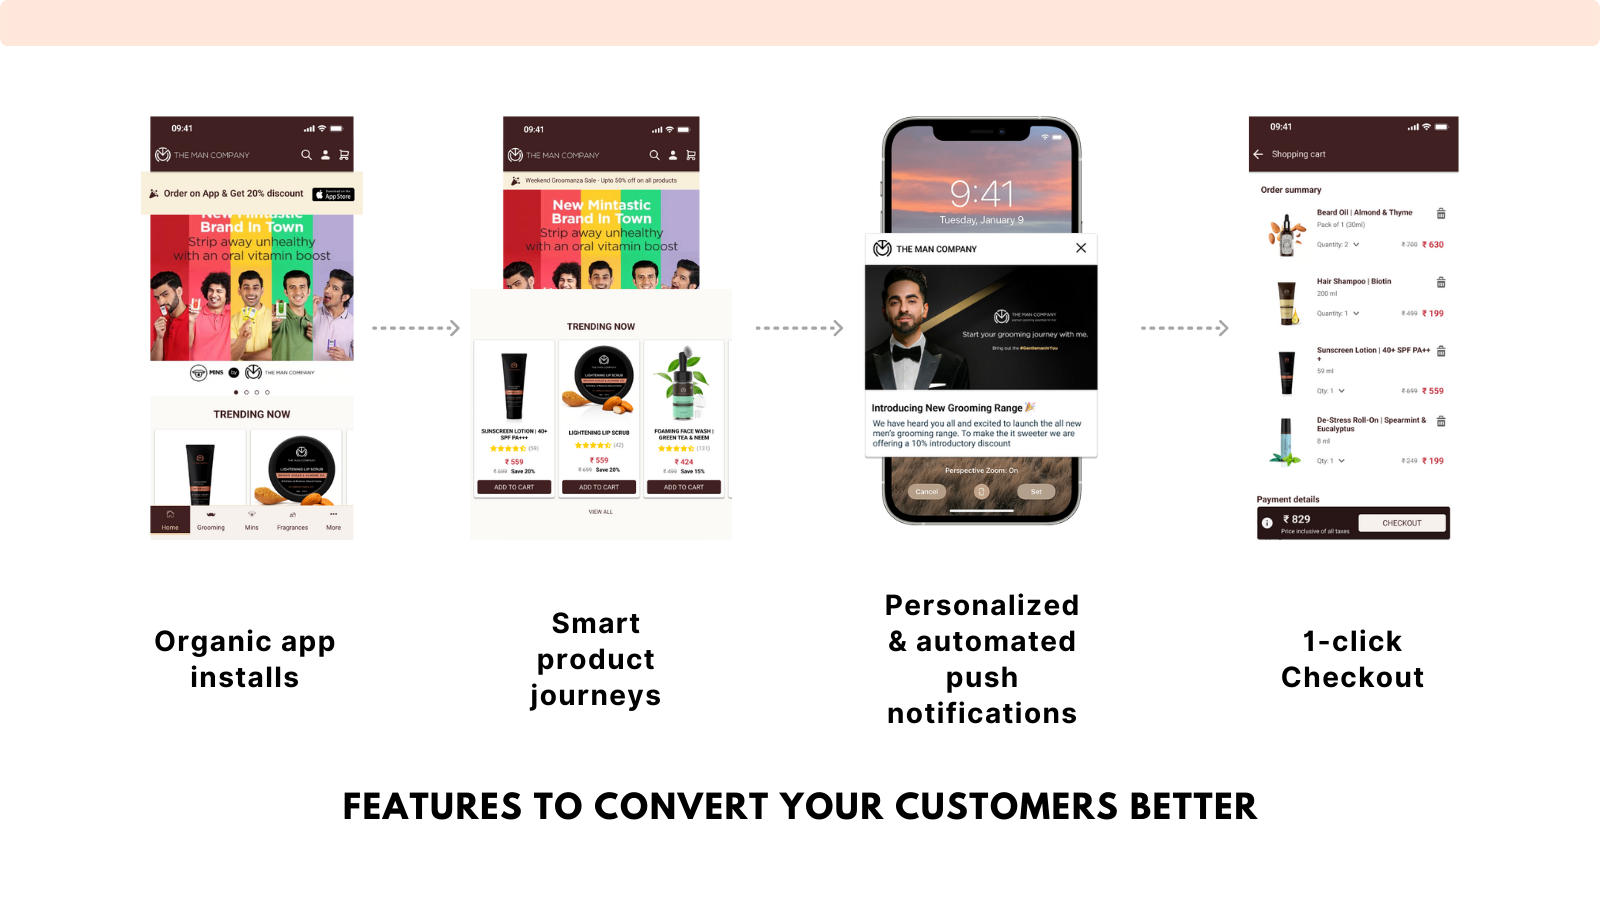 Platform features to convert your customers better 